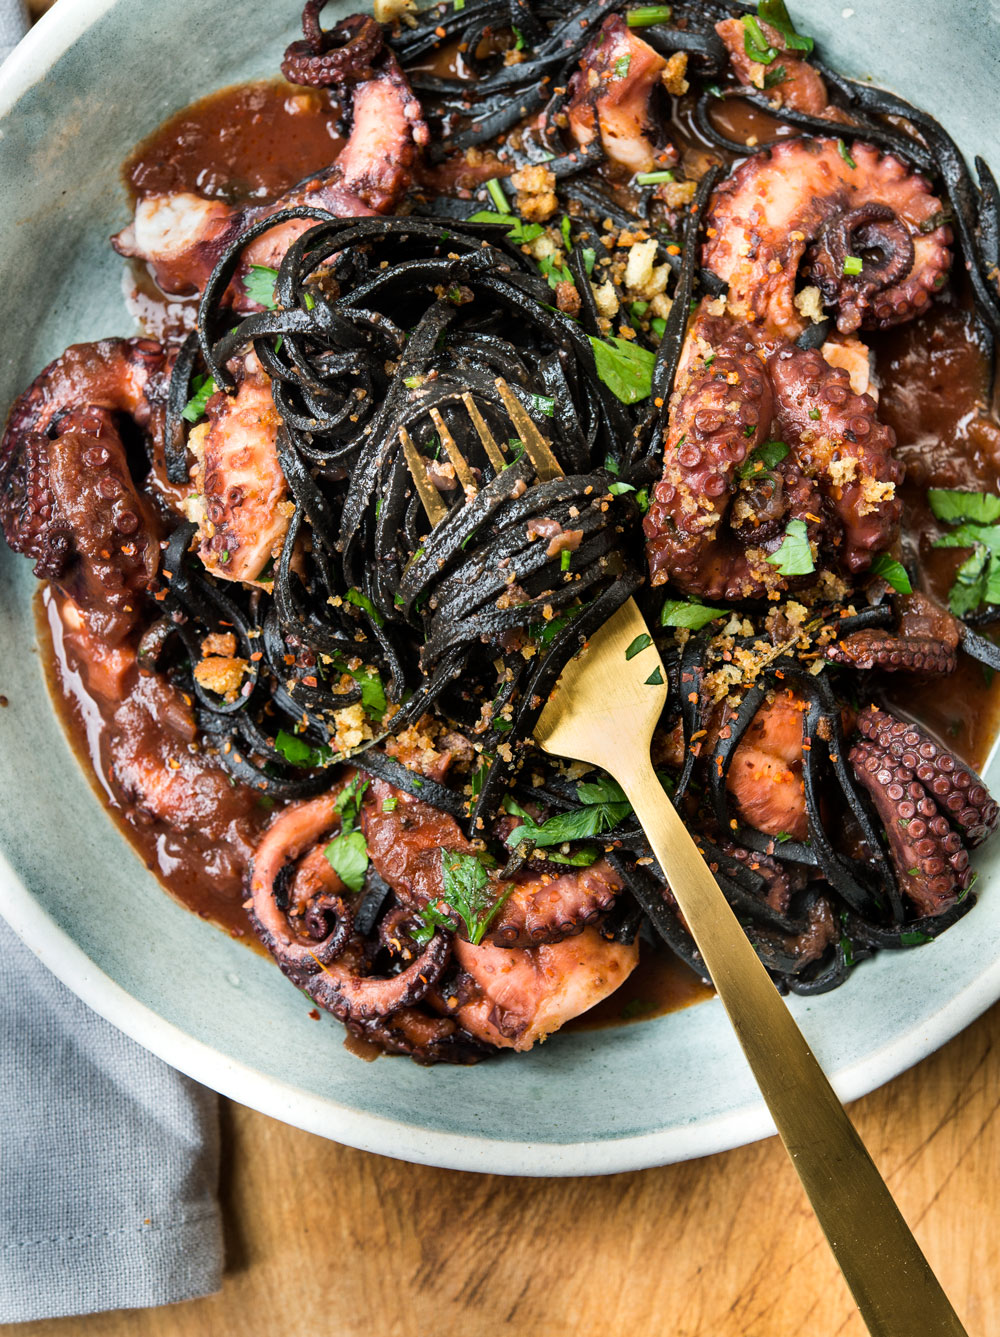 Pasta With Squid Ink Cuttlefish - Your Guardian Chef